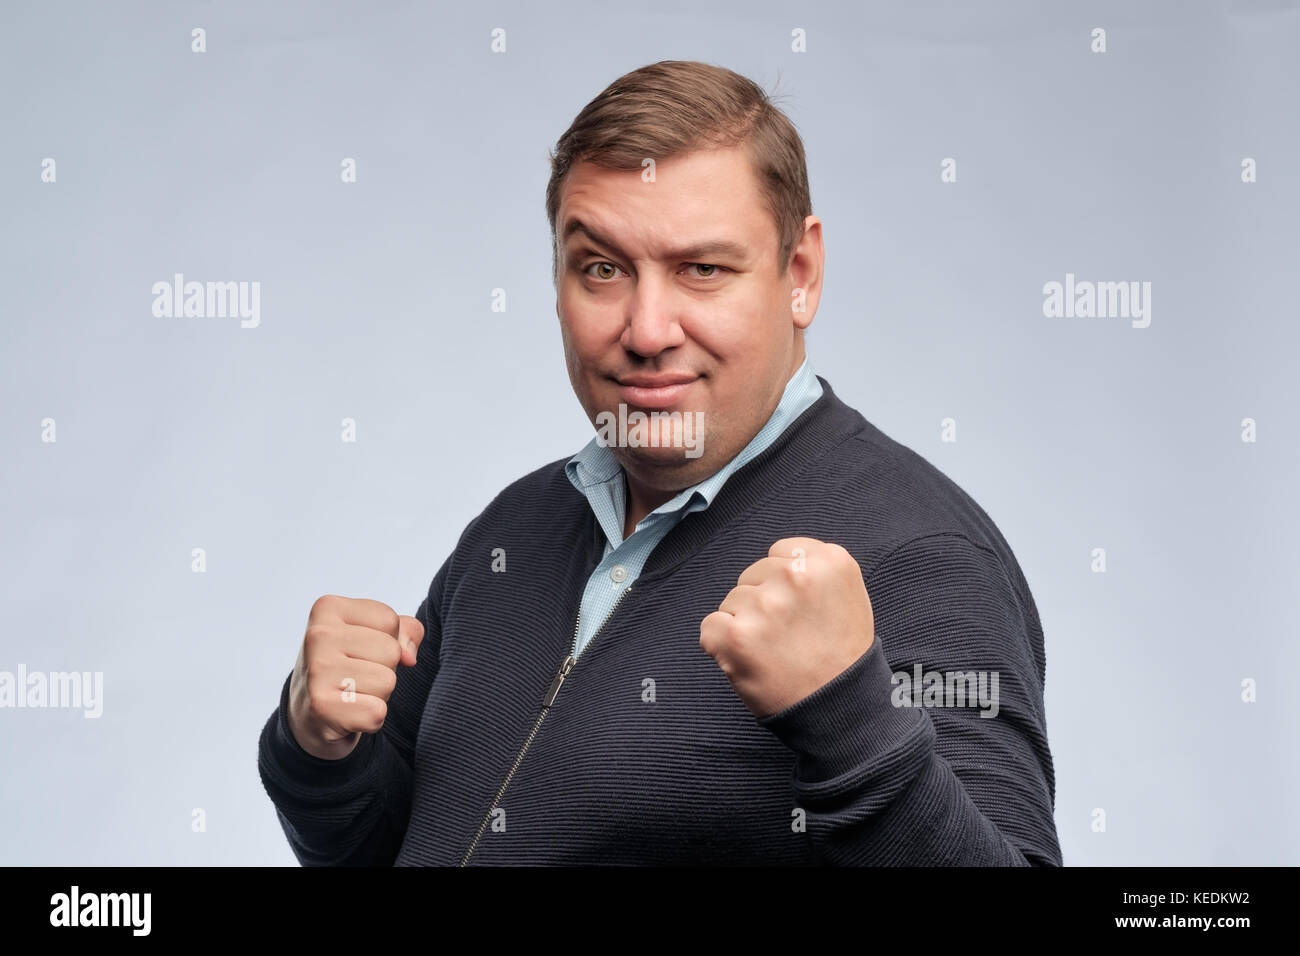 Half body portrait of confident middle aged man with folded arms looking at camera Stock Photo